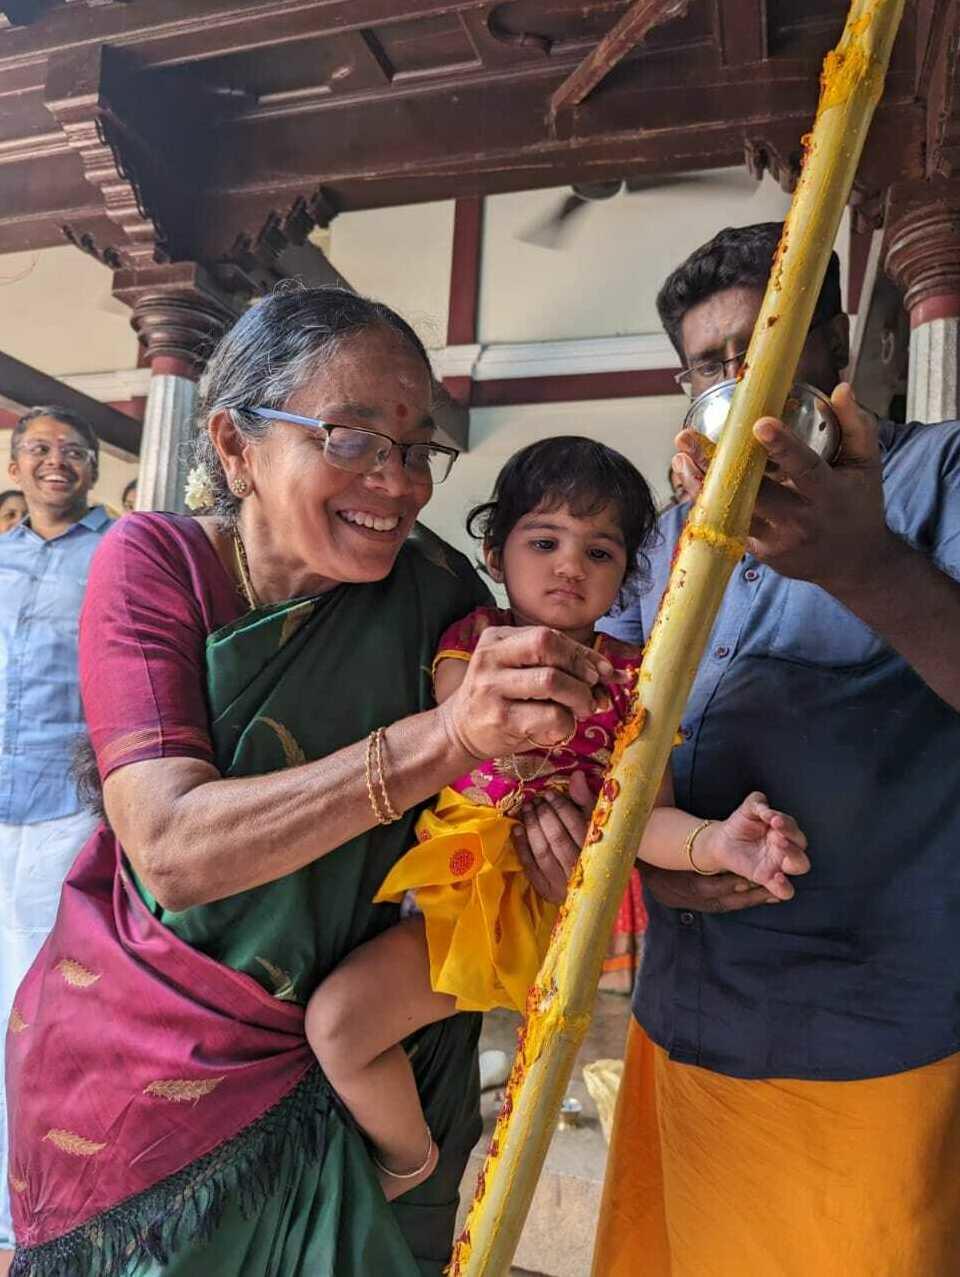 Before the celebration, the youngest members of the family apply turmeric on the bamboo shoot. The ritual is said to ensure a smooth and joyous celebration.